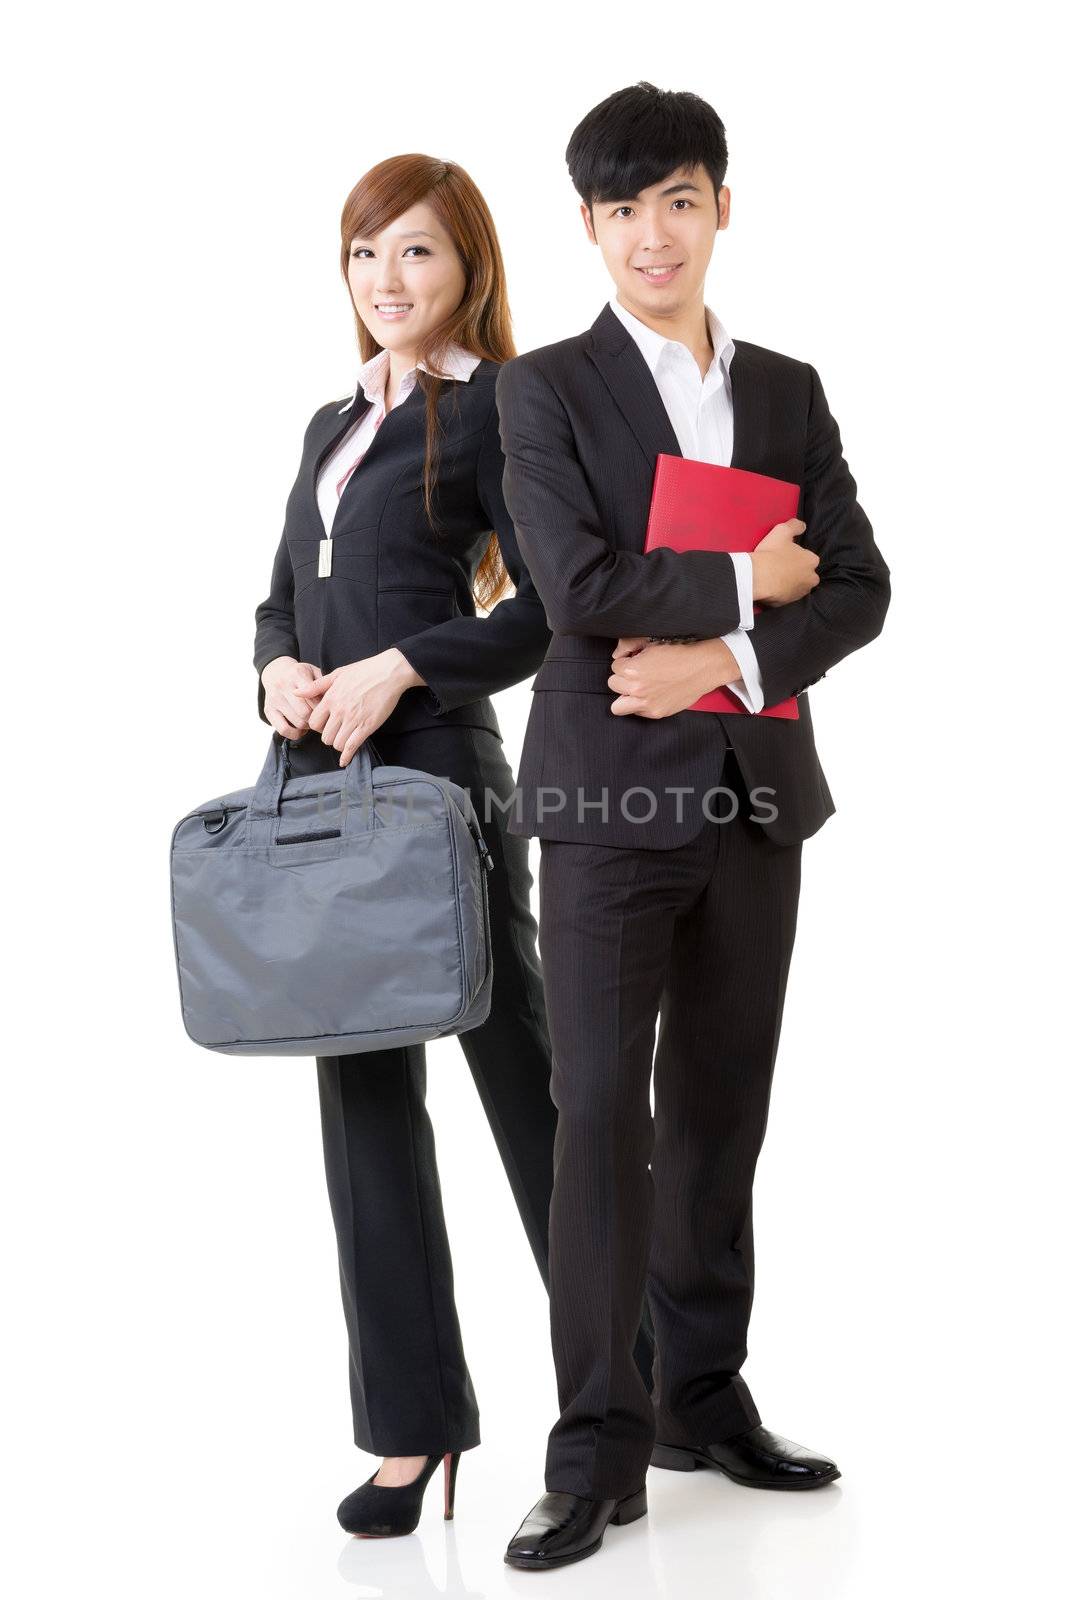 Young business man and woman, full length portrait isolated on white background.